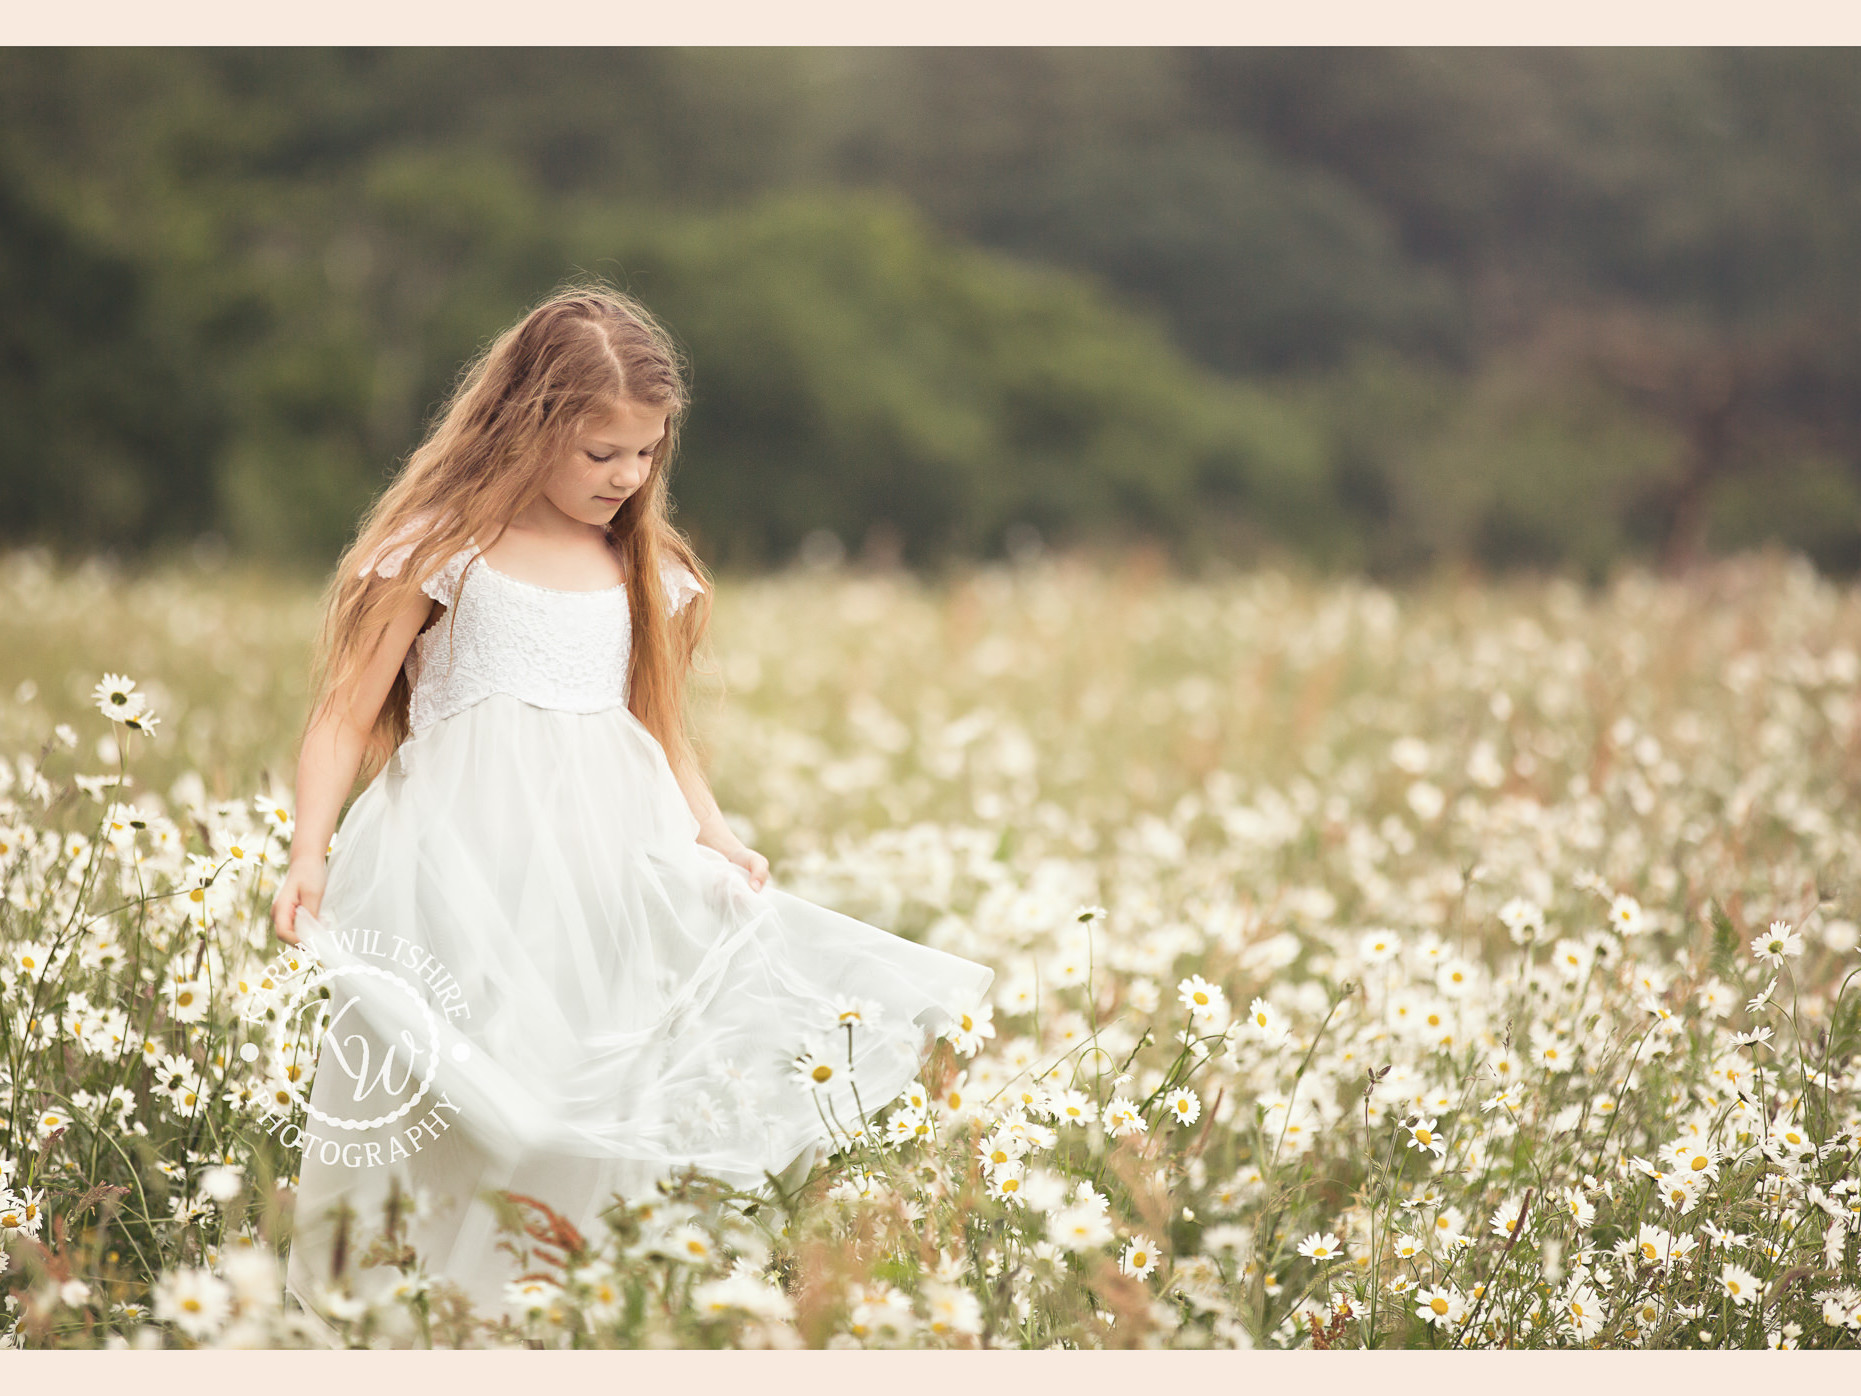 Long haired girl in wild daisies